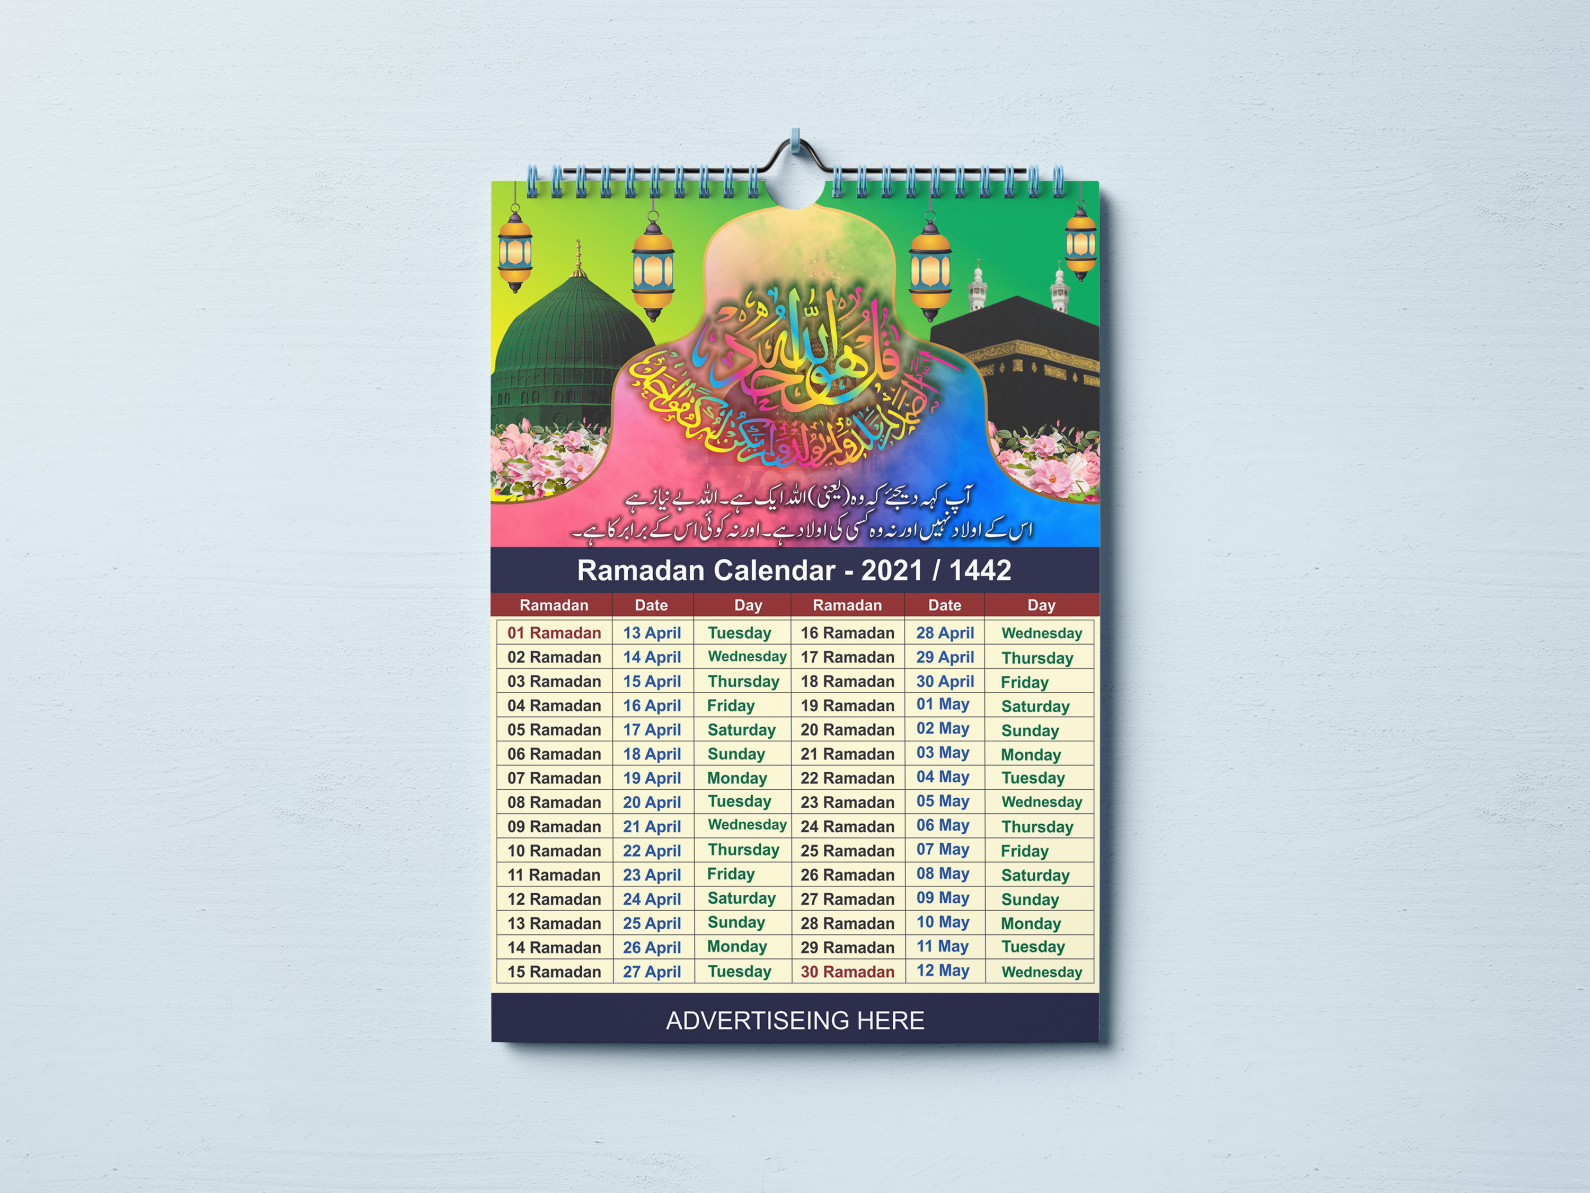 Ramadan Calendar Design 2021 Free Cdr file Download by Inqalab Graphics